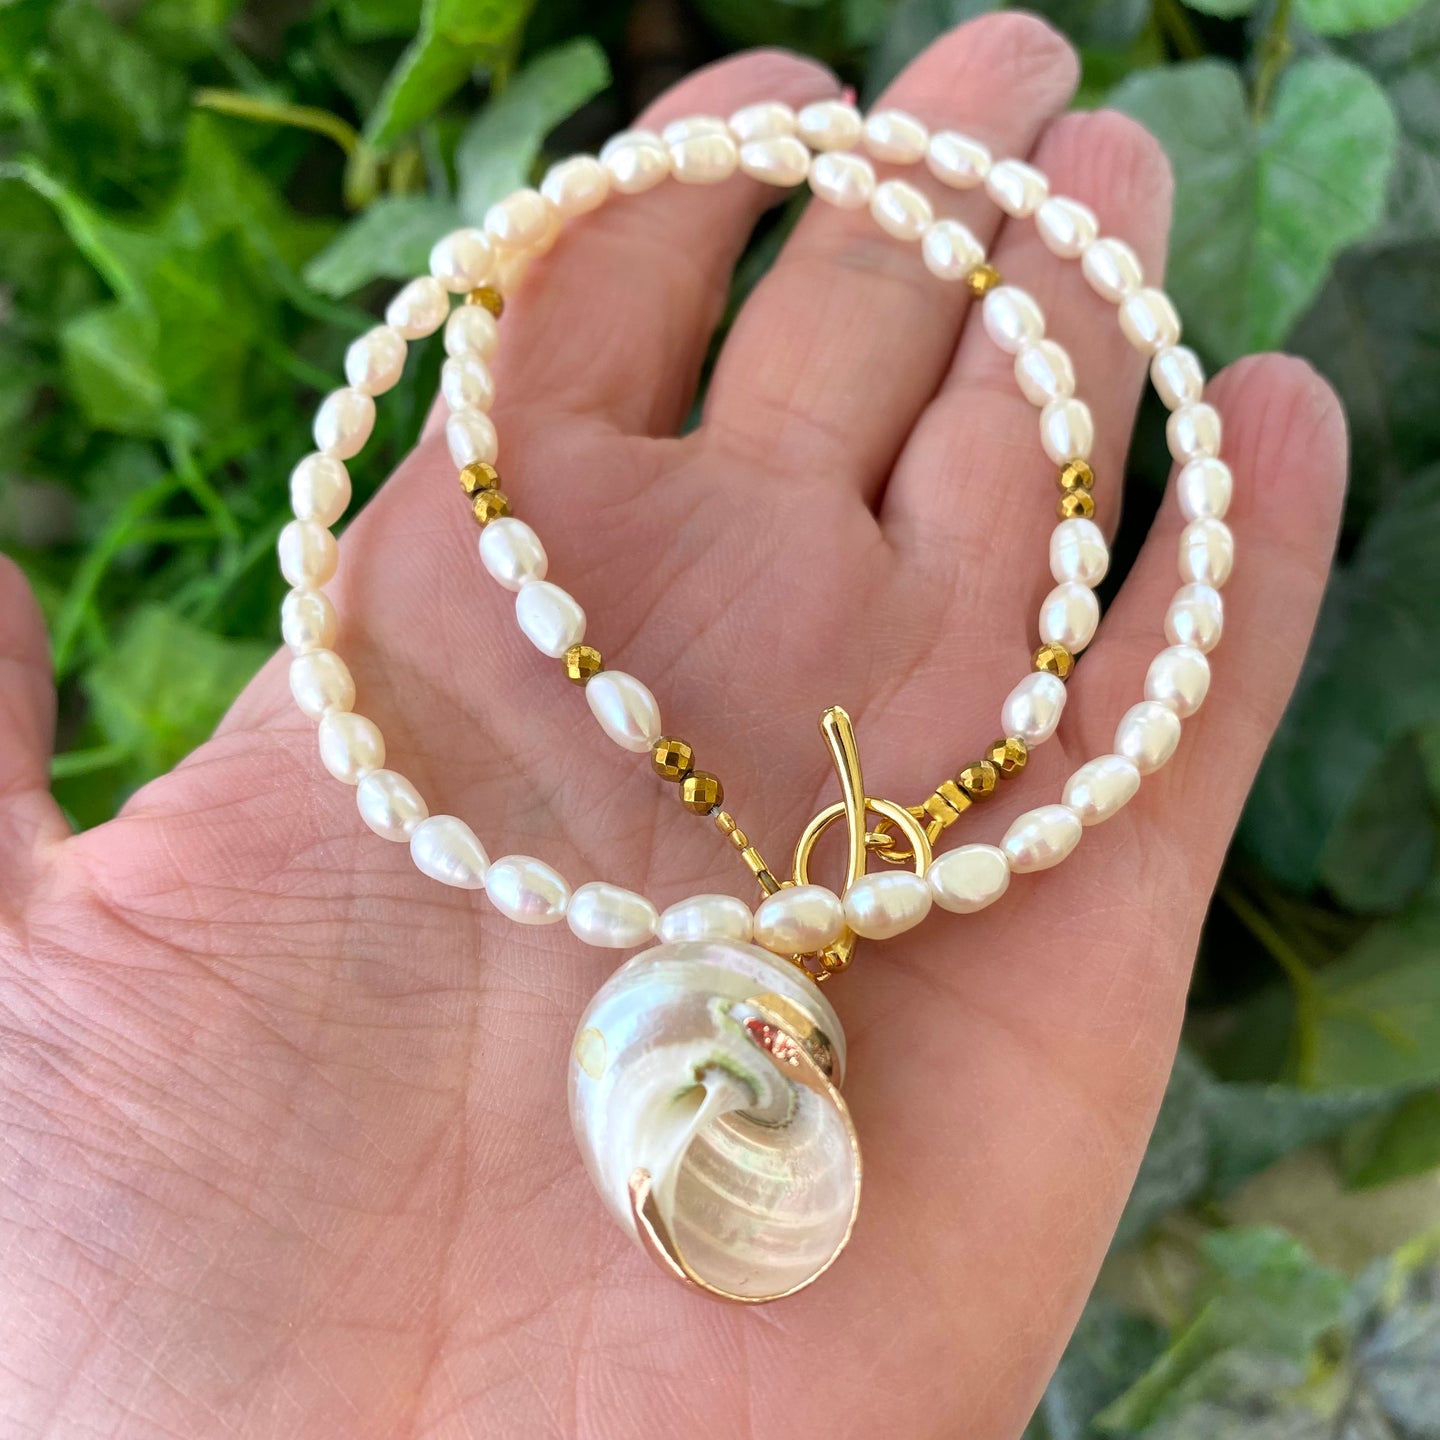 Real Seashell & Freshwater Pearl Beaded Necklace White Shell Pendant, 19